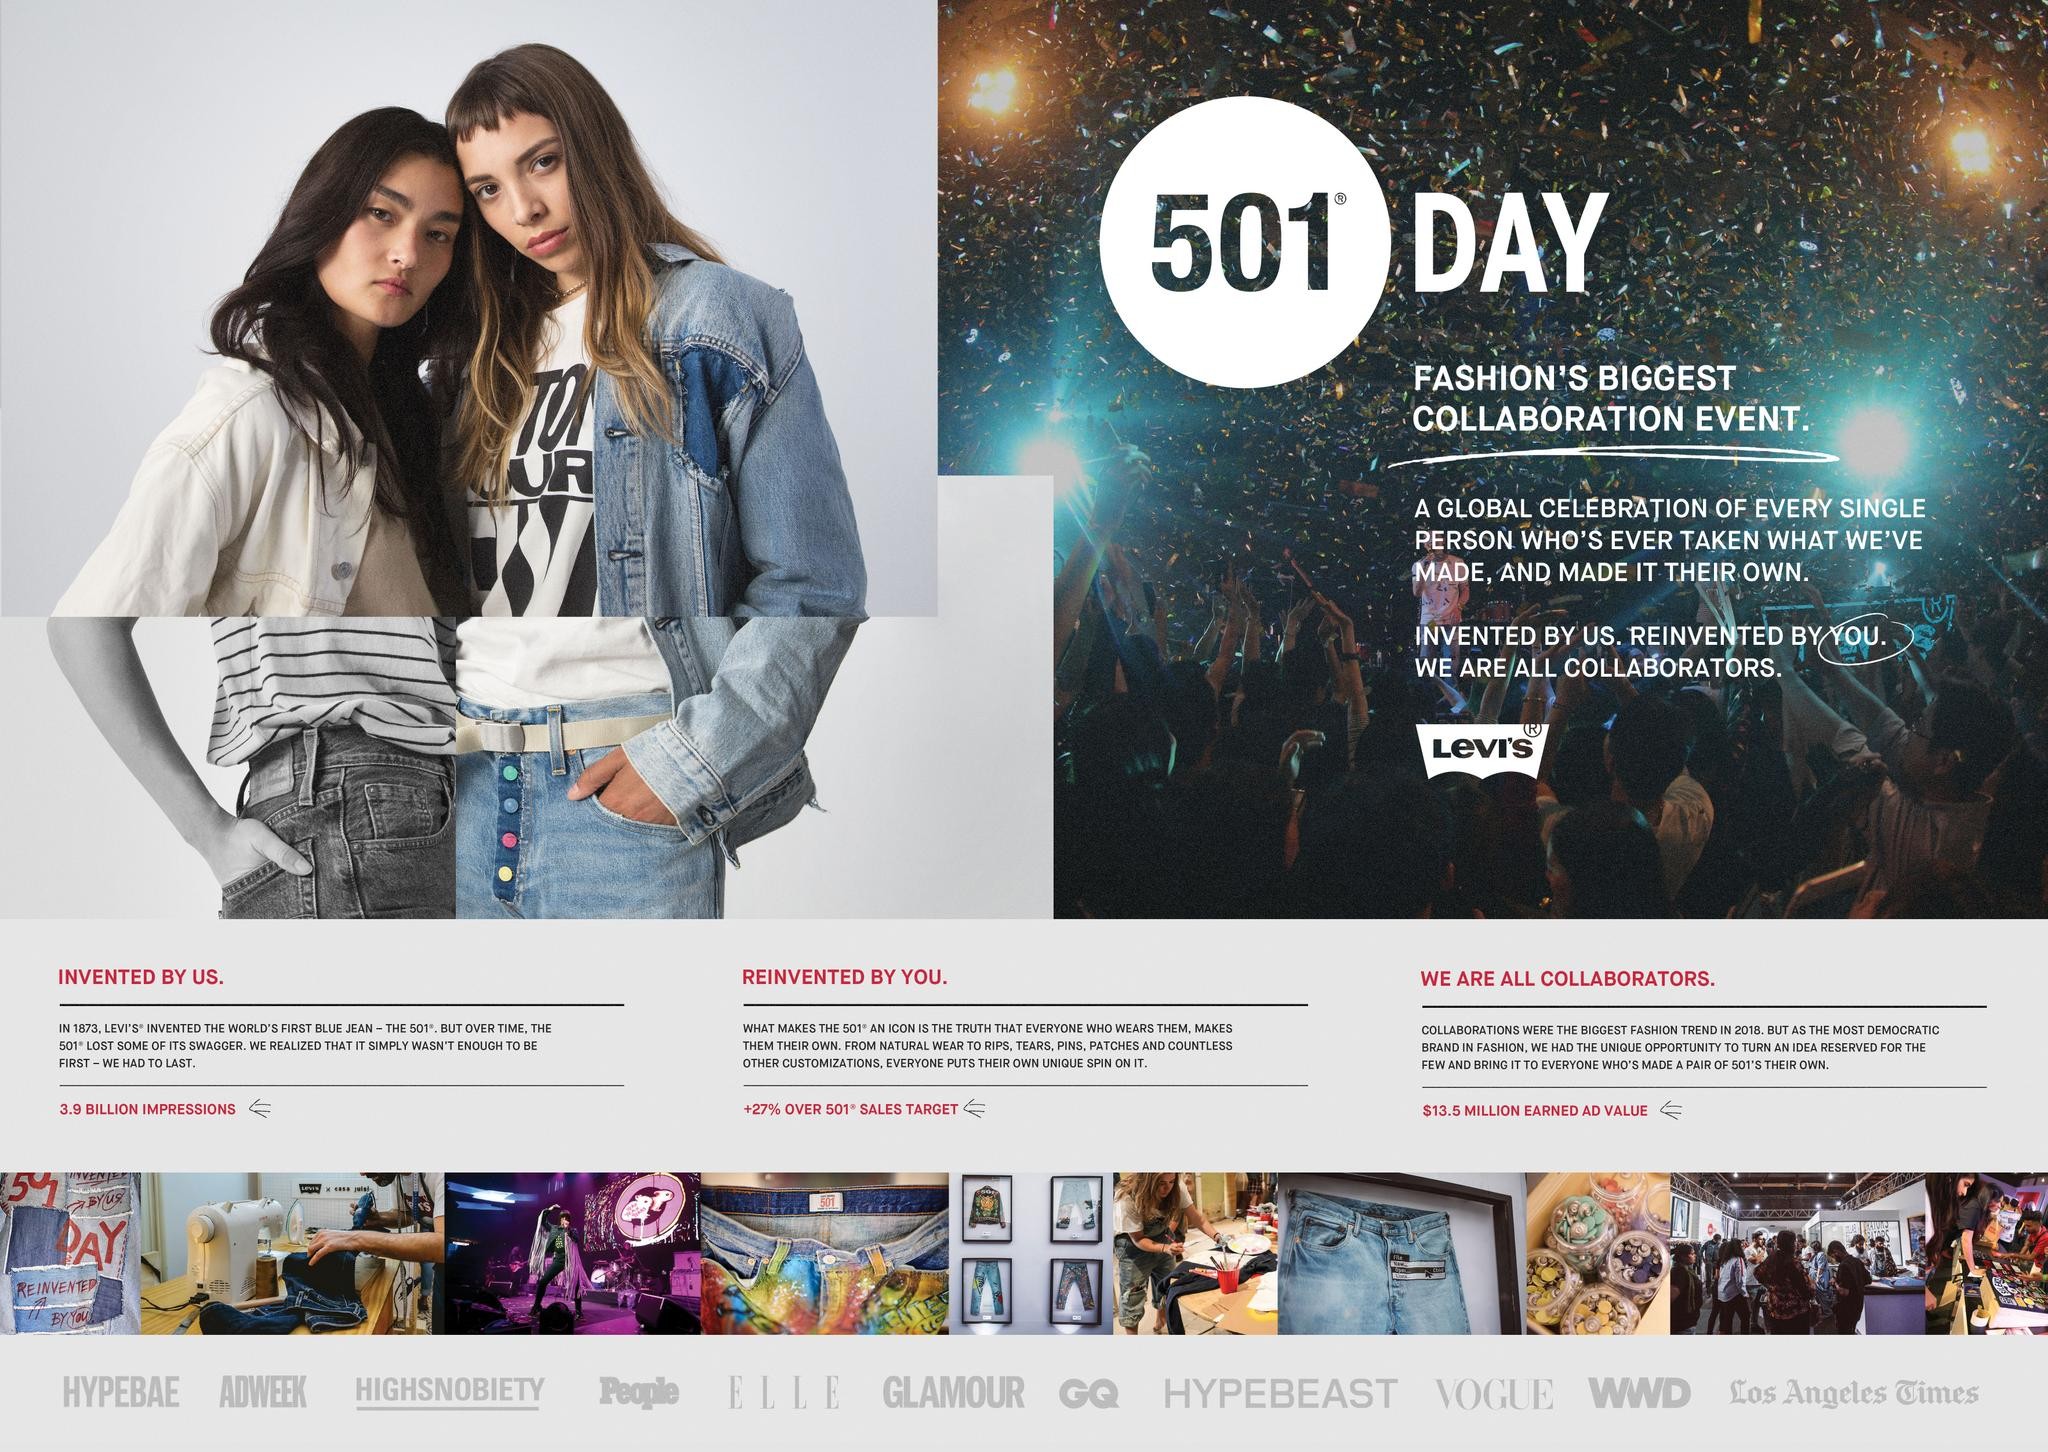 501 Day